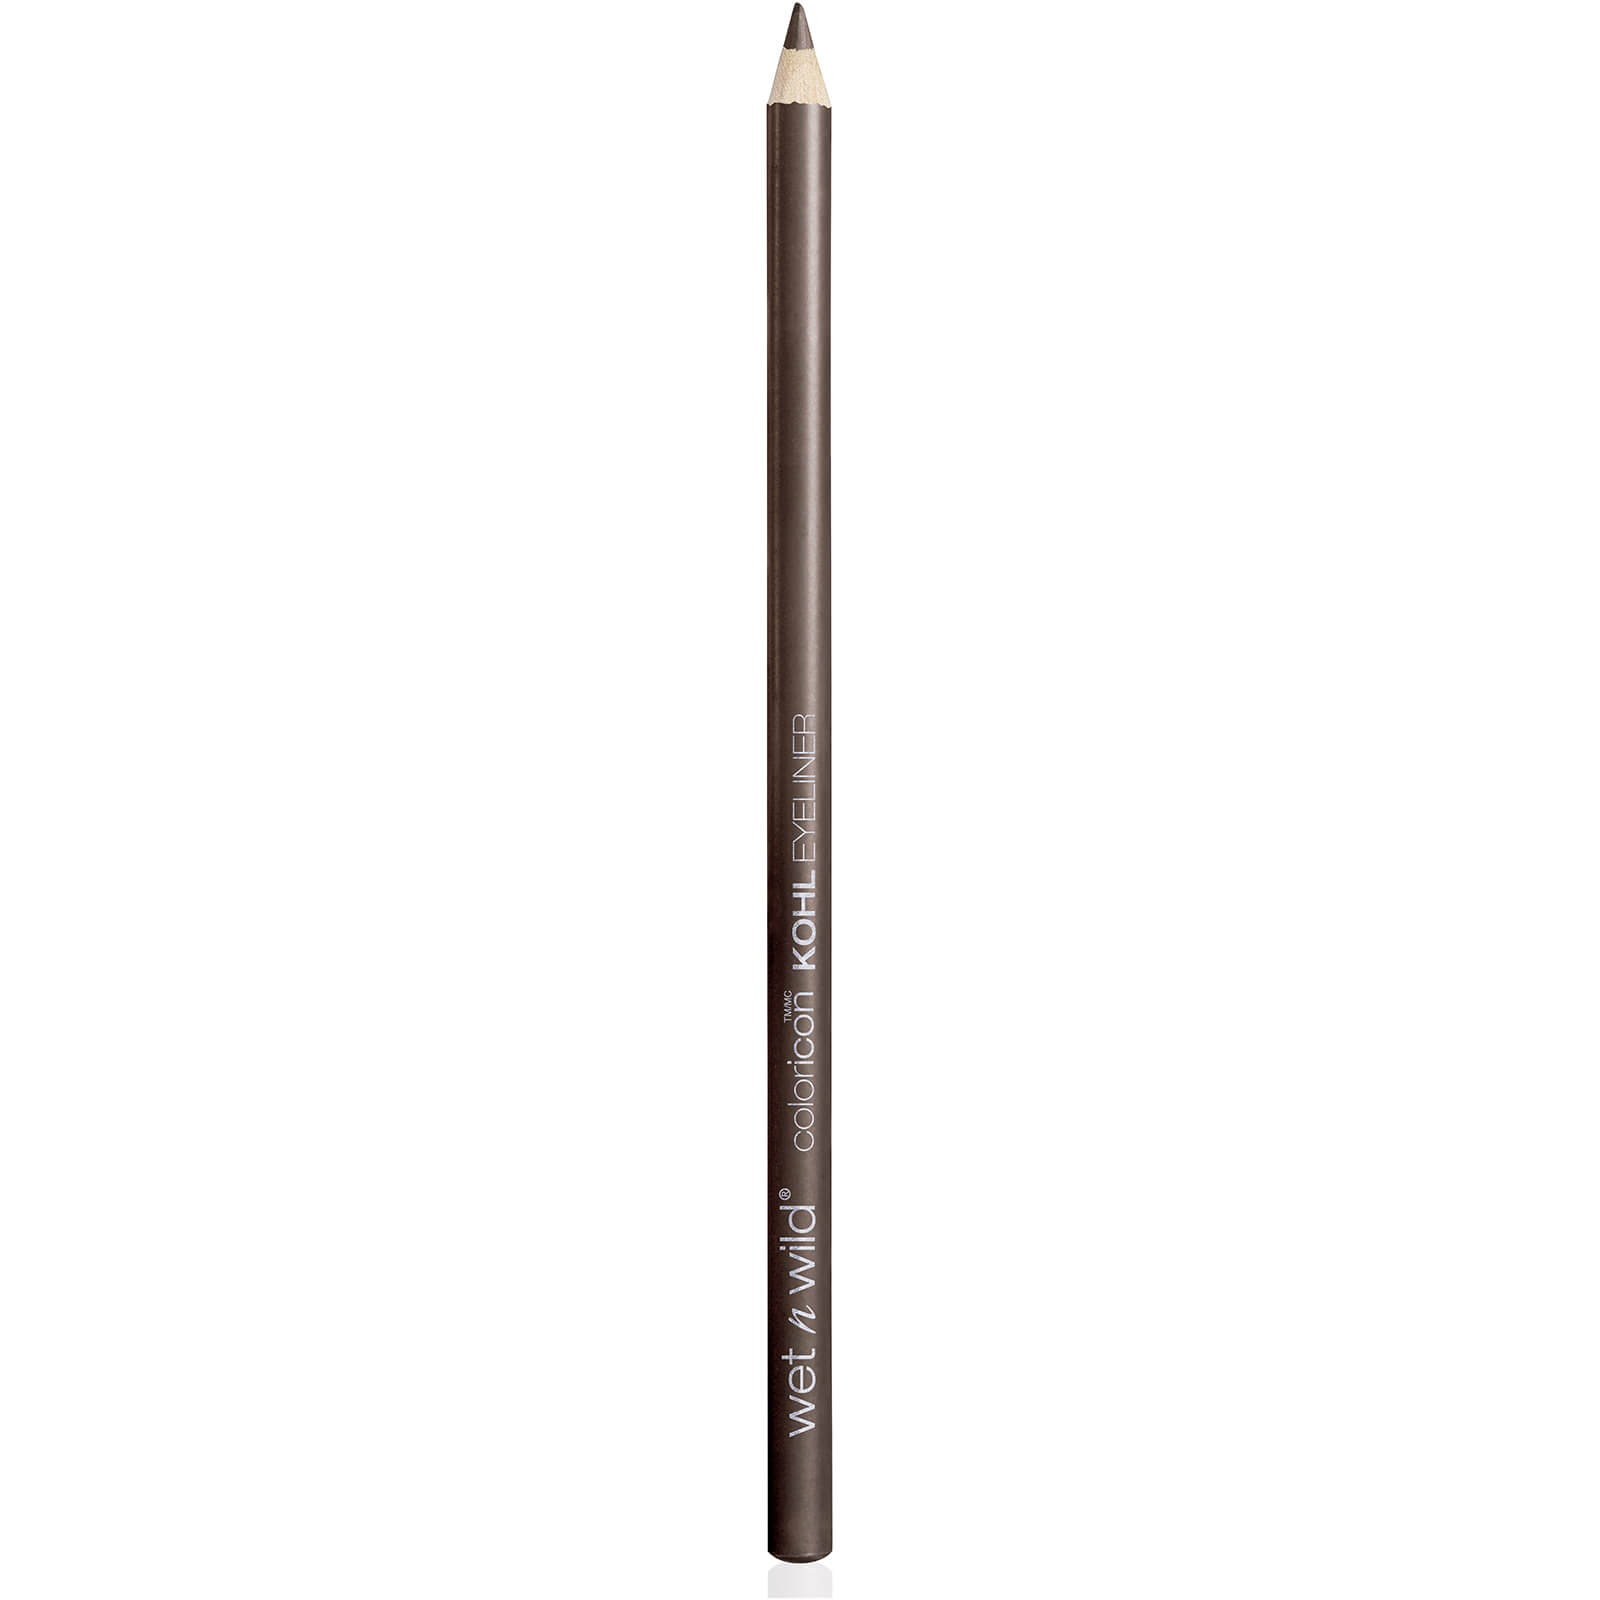 wet n wild coloricon Kohl Eyeliner Pencil 1.4g (Various Shades) - Simma Brown Now!